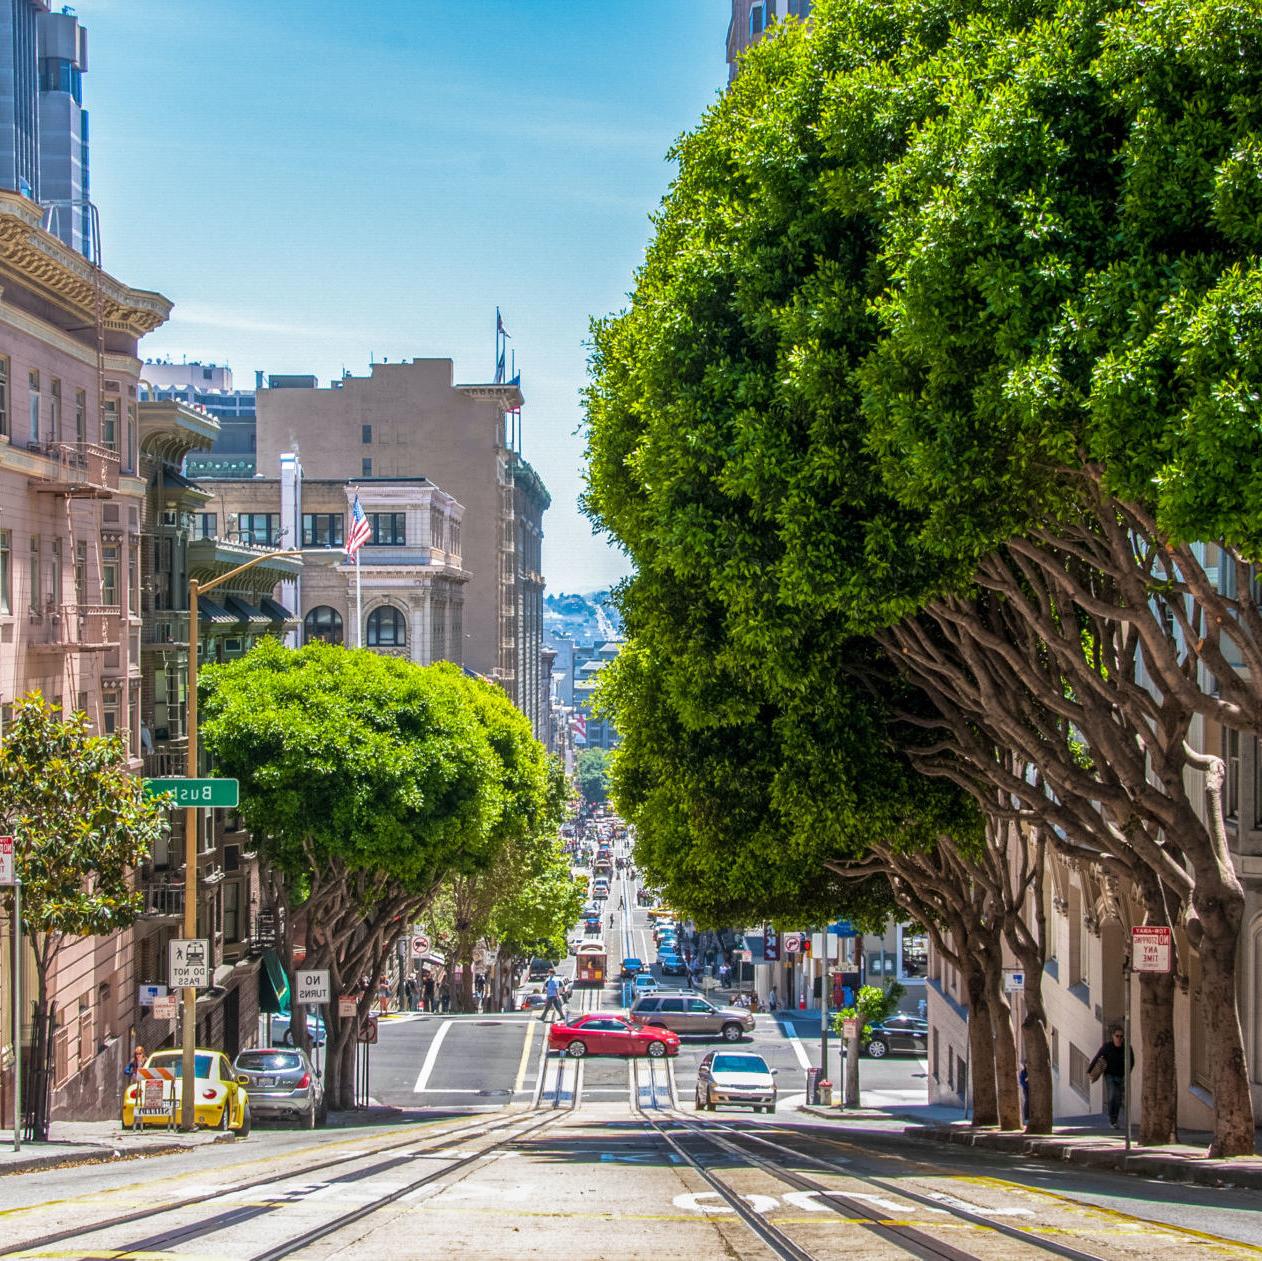 getting a personal loan can help residents maintain their lifestyle while living in the expensive downtown area of San Francisco